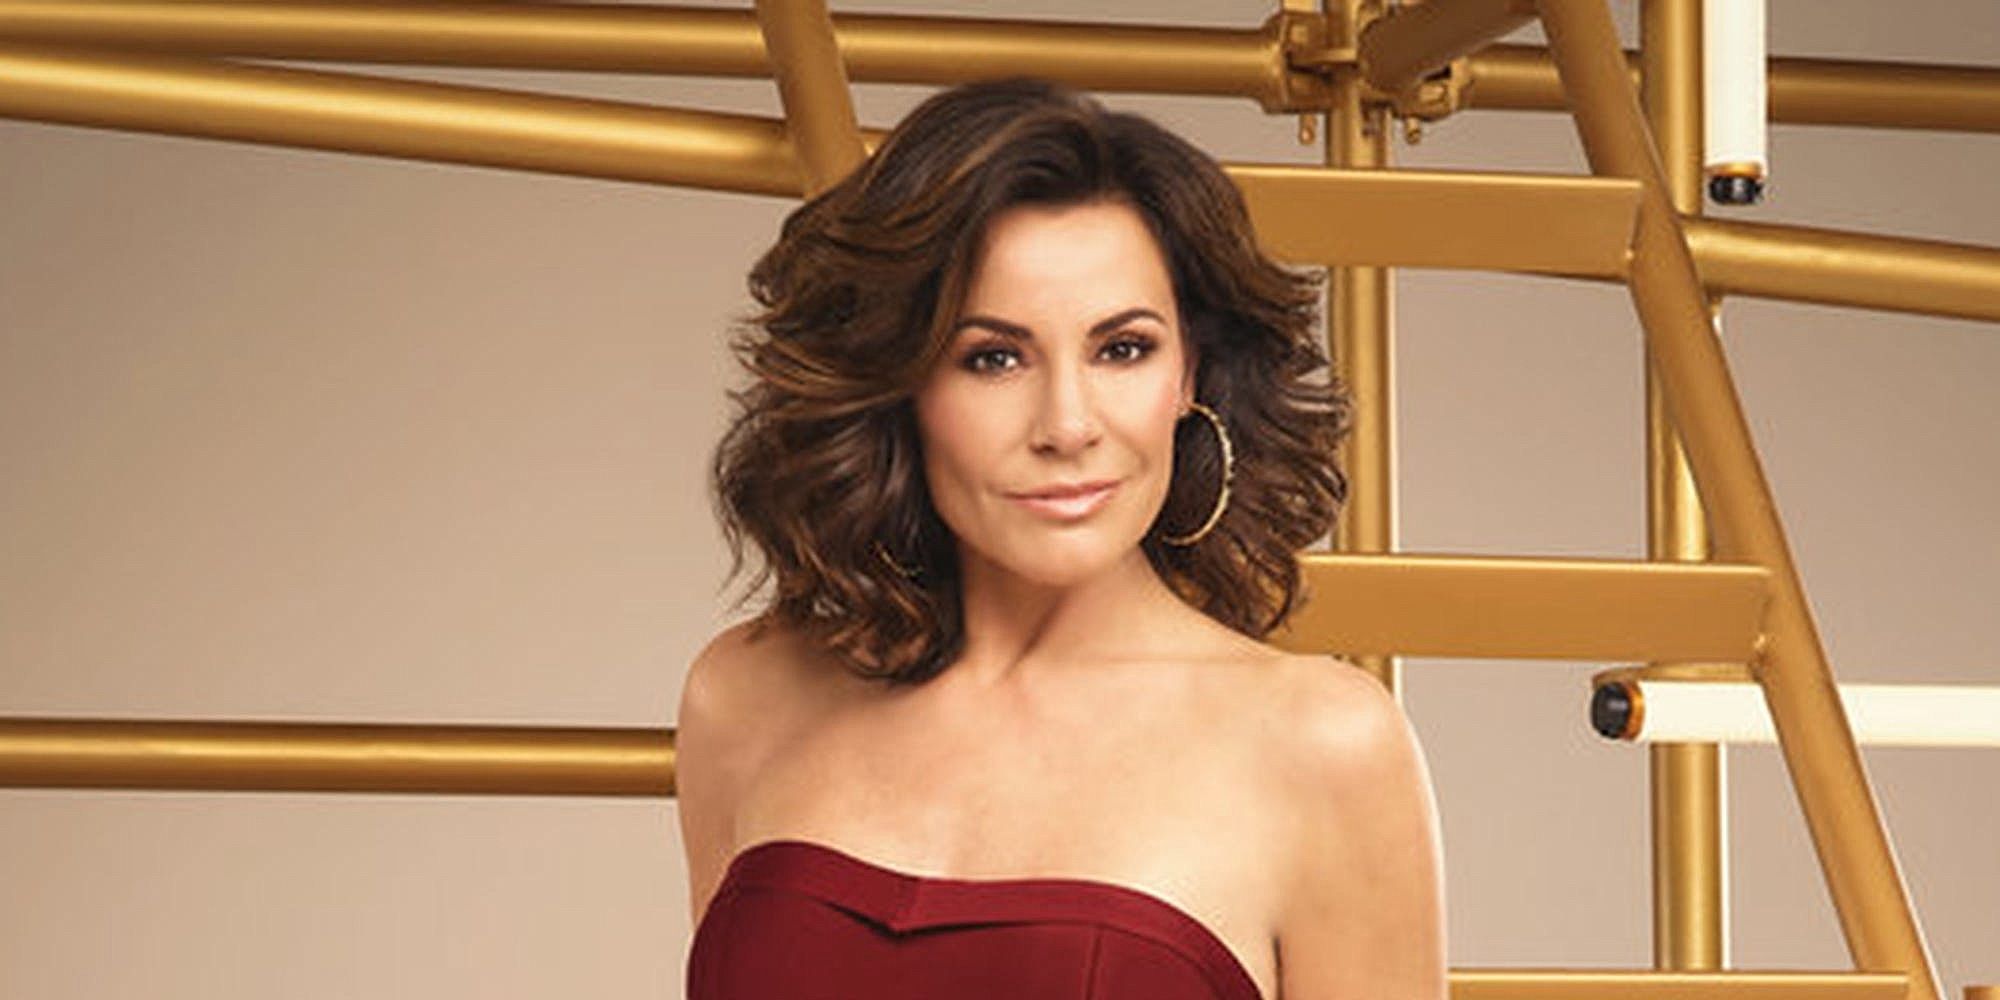 Luann De Lesseps Real Housewives of New York